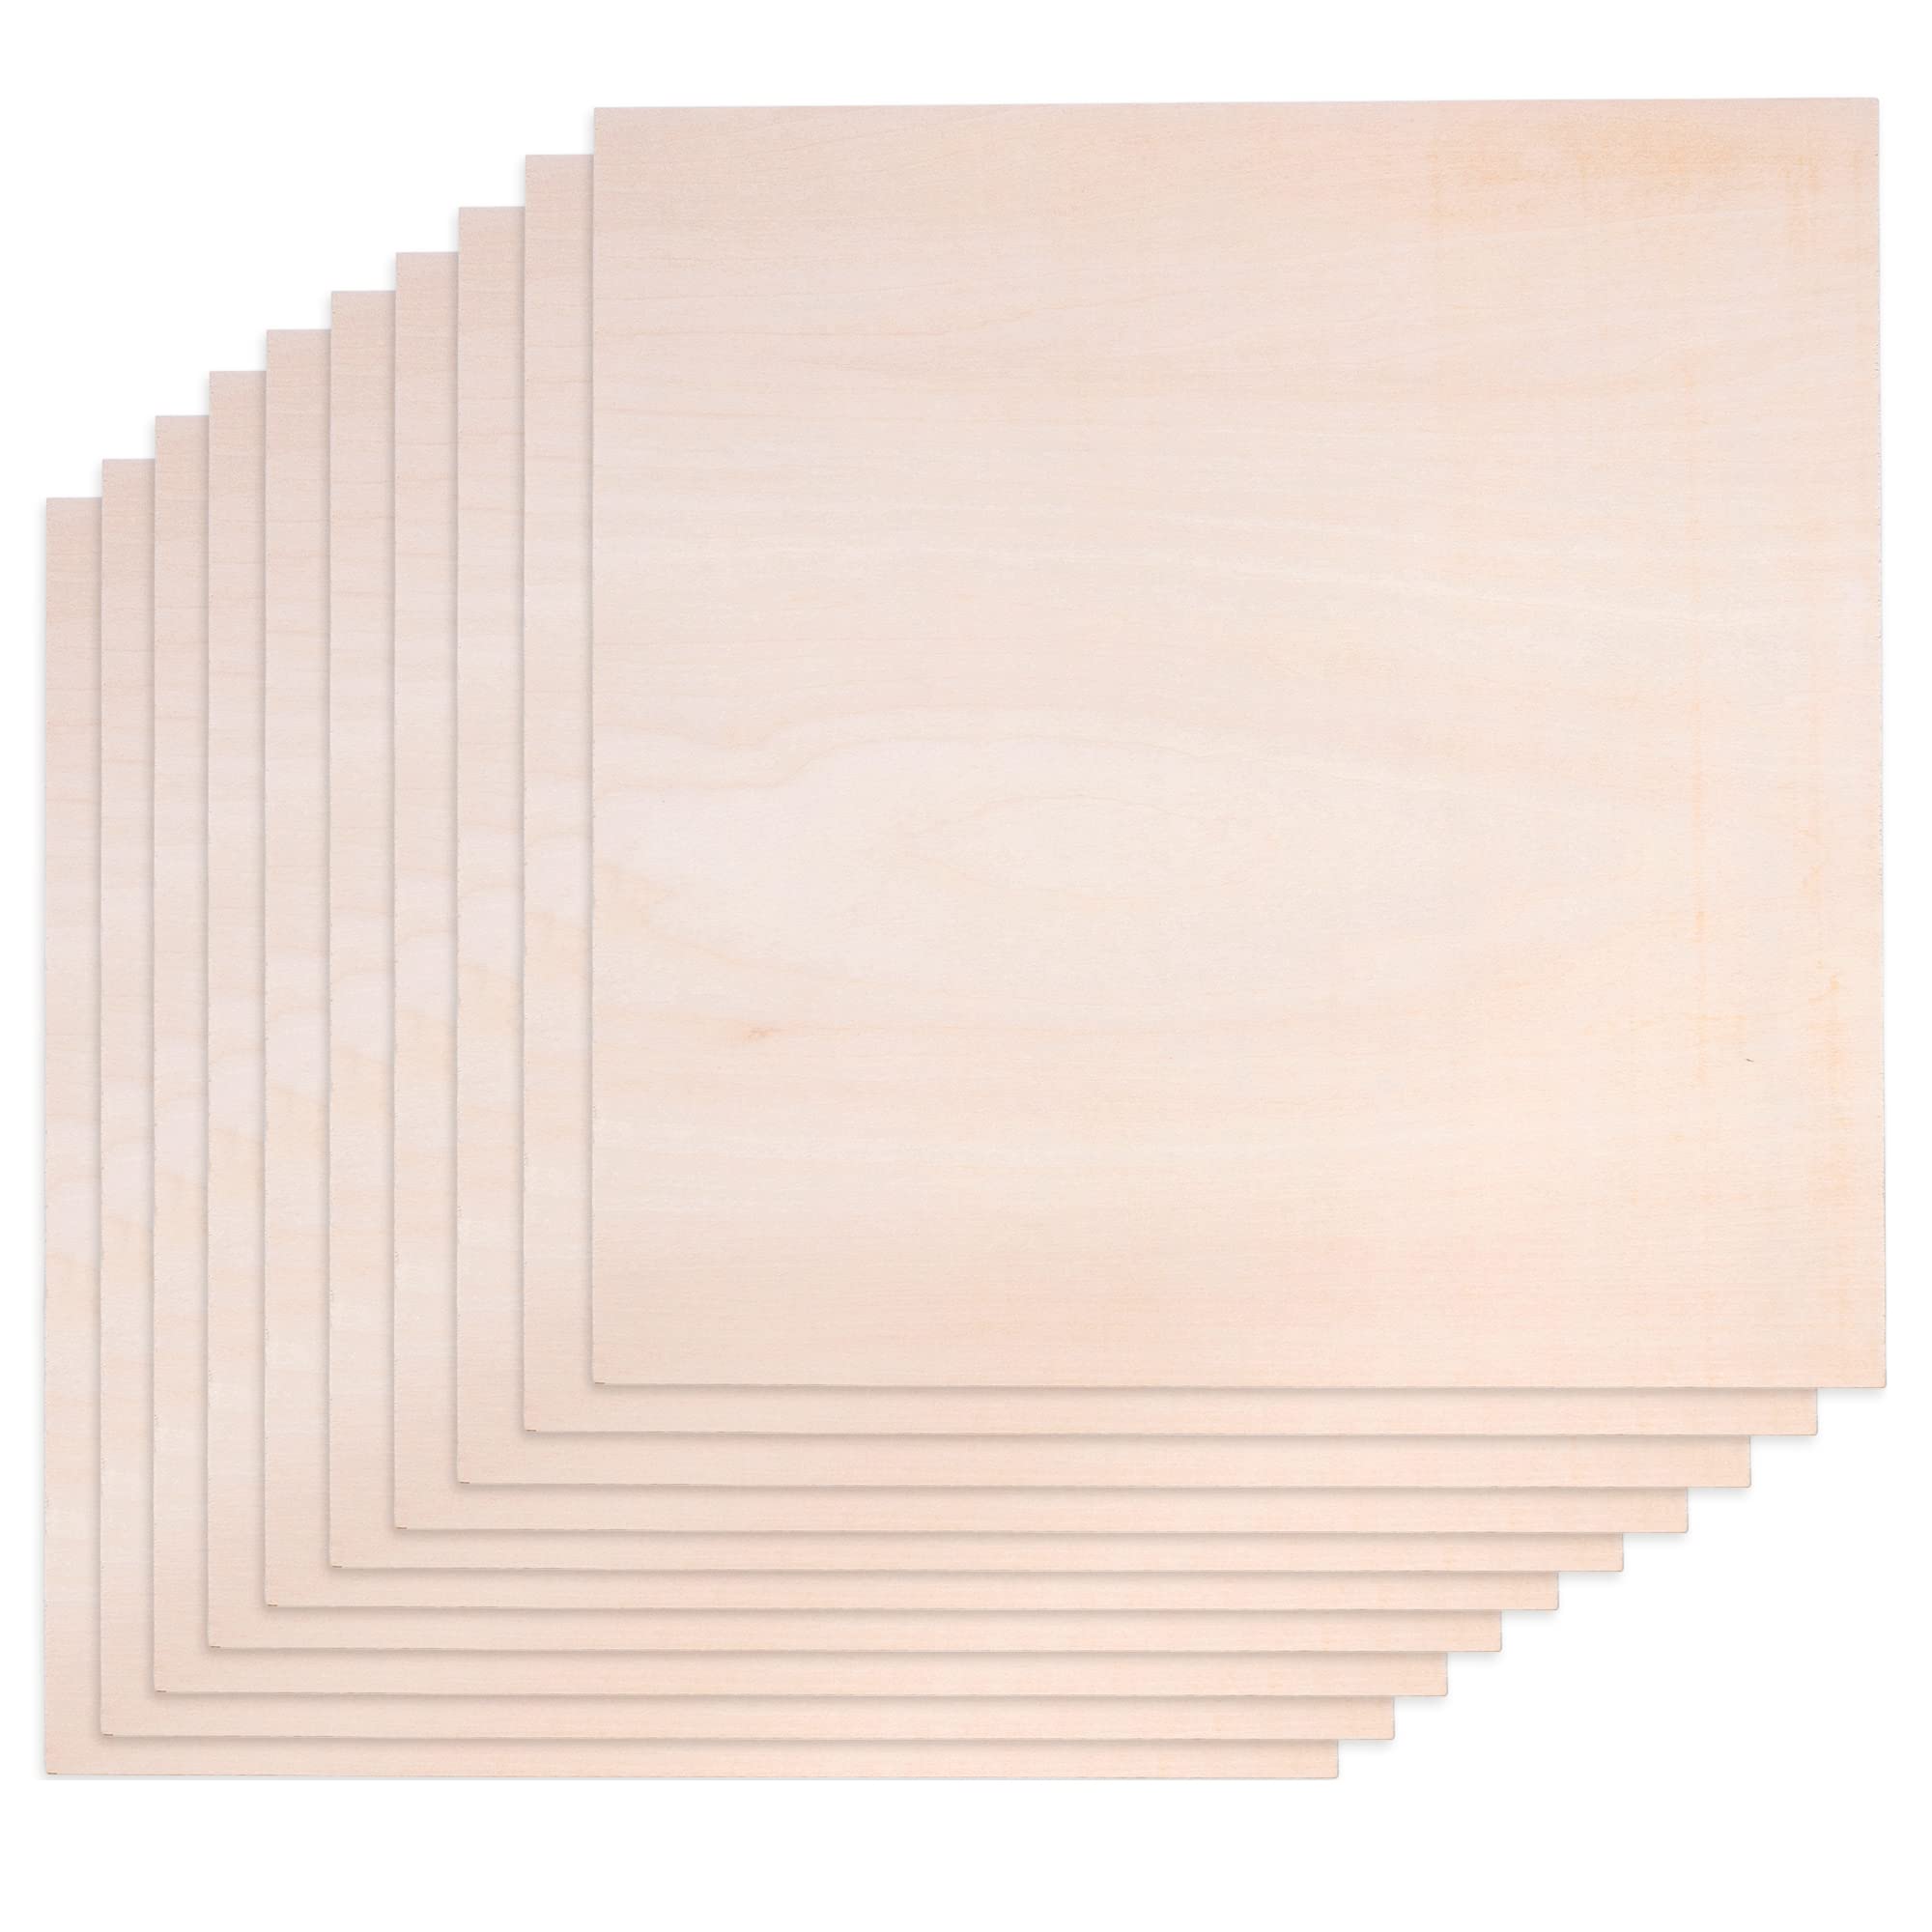 Basswood Sheets 1/8 Bass Wood Pack of 10-12 x 12 x 1/8 inch Plywood - Balsa  Wood Sheets with Smooth Surfaces - 3mm Basswood for Laser Cutting Wood  Burning Architectural Models Drawing